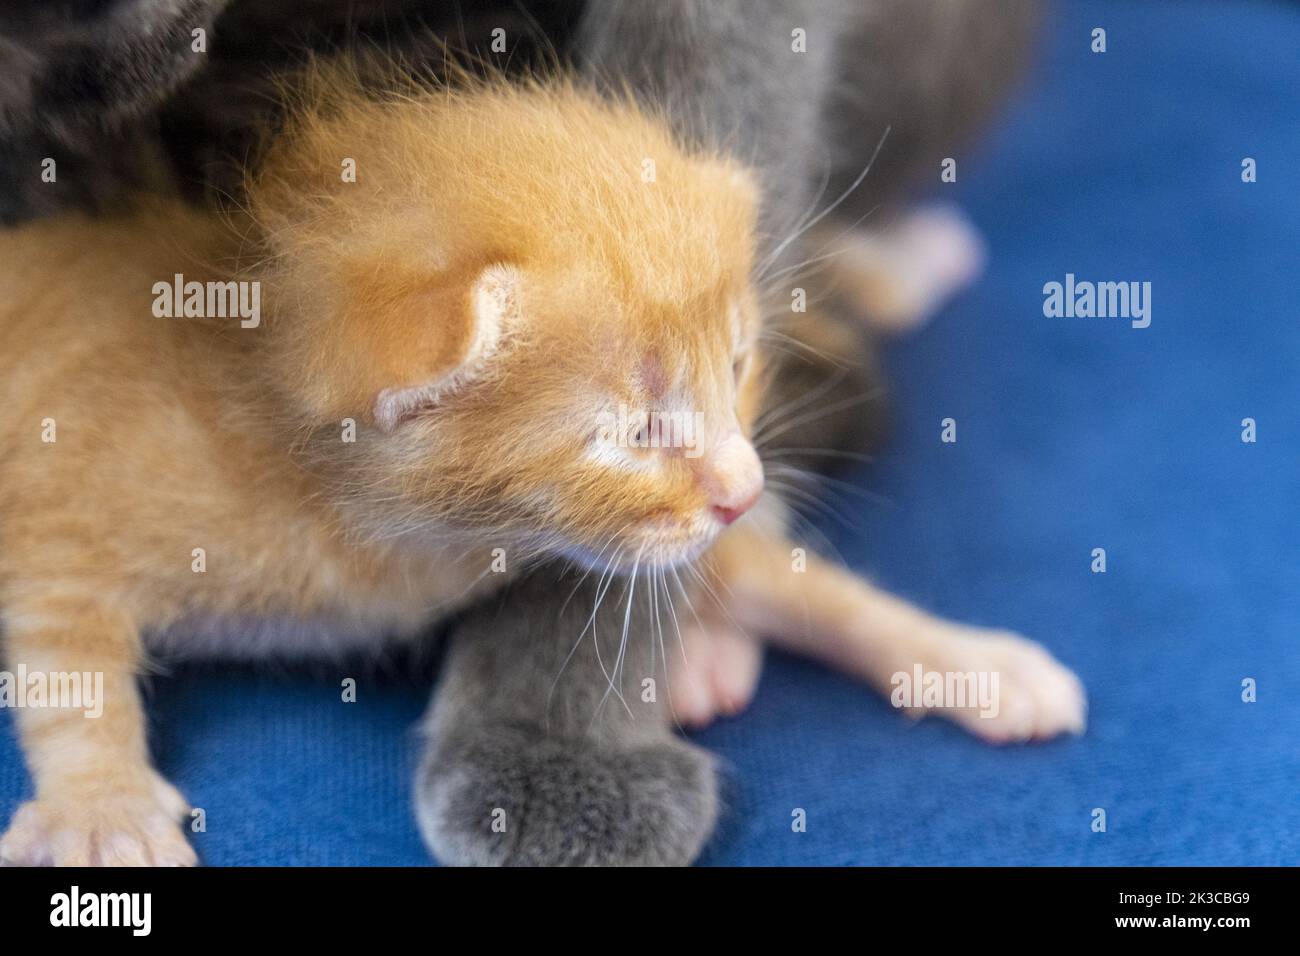 Newborn orange tabby cat with its mother's paw, kitten concept, half-open eyes newborn cat is laying down, cute small kitten concept, red baby cat Stock Photo